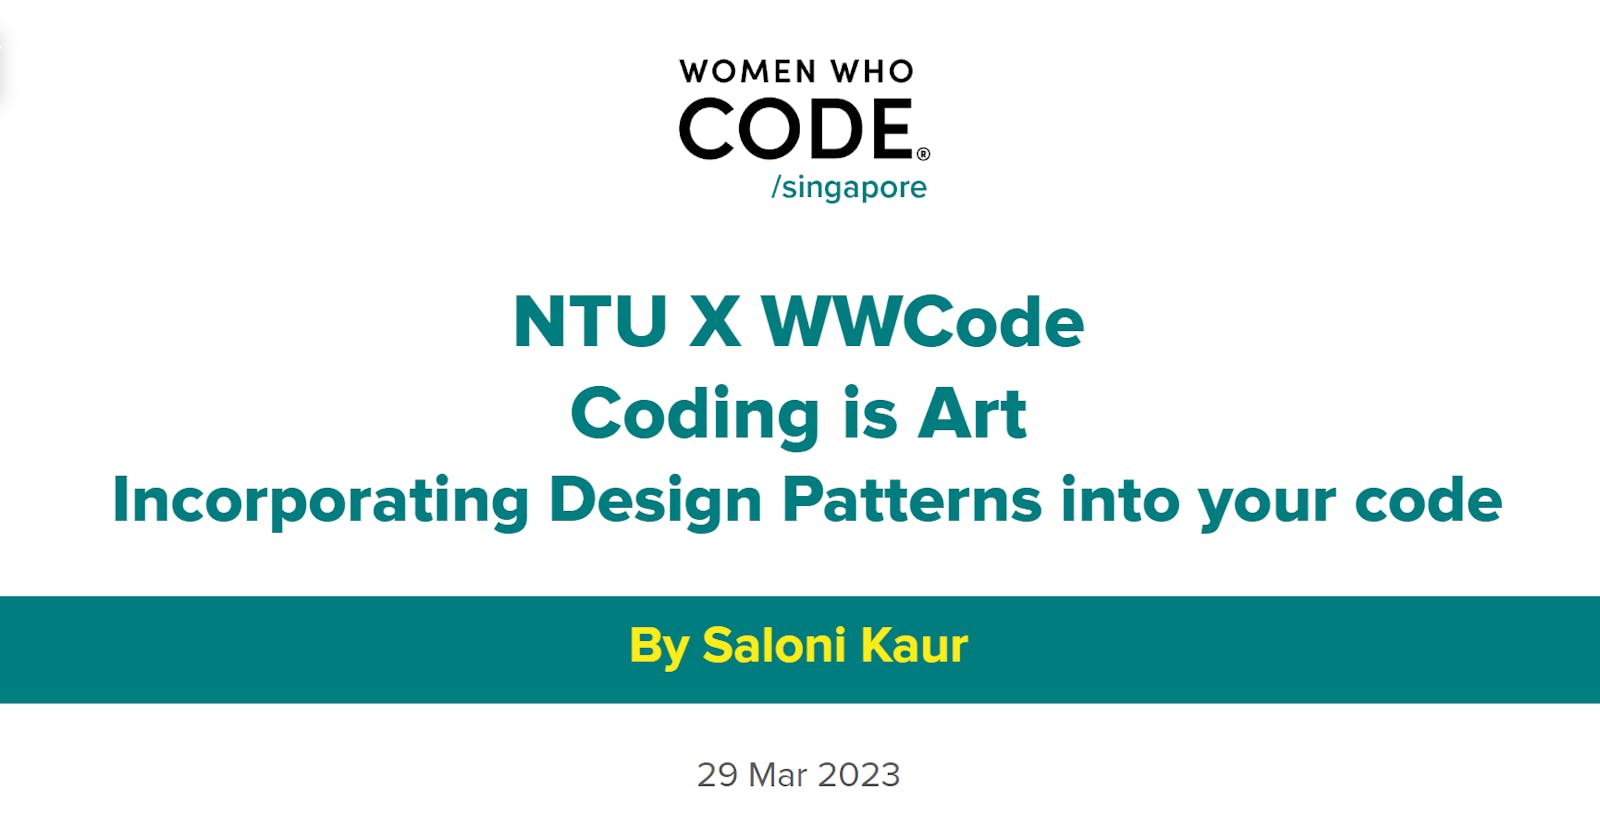 Coding is Art: Incorporating Design Patterns Into Your Code